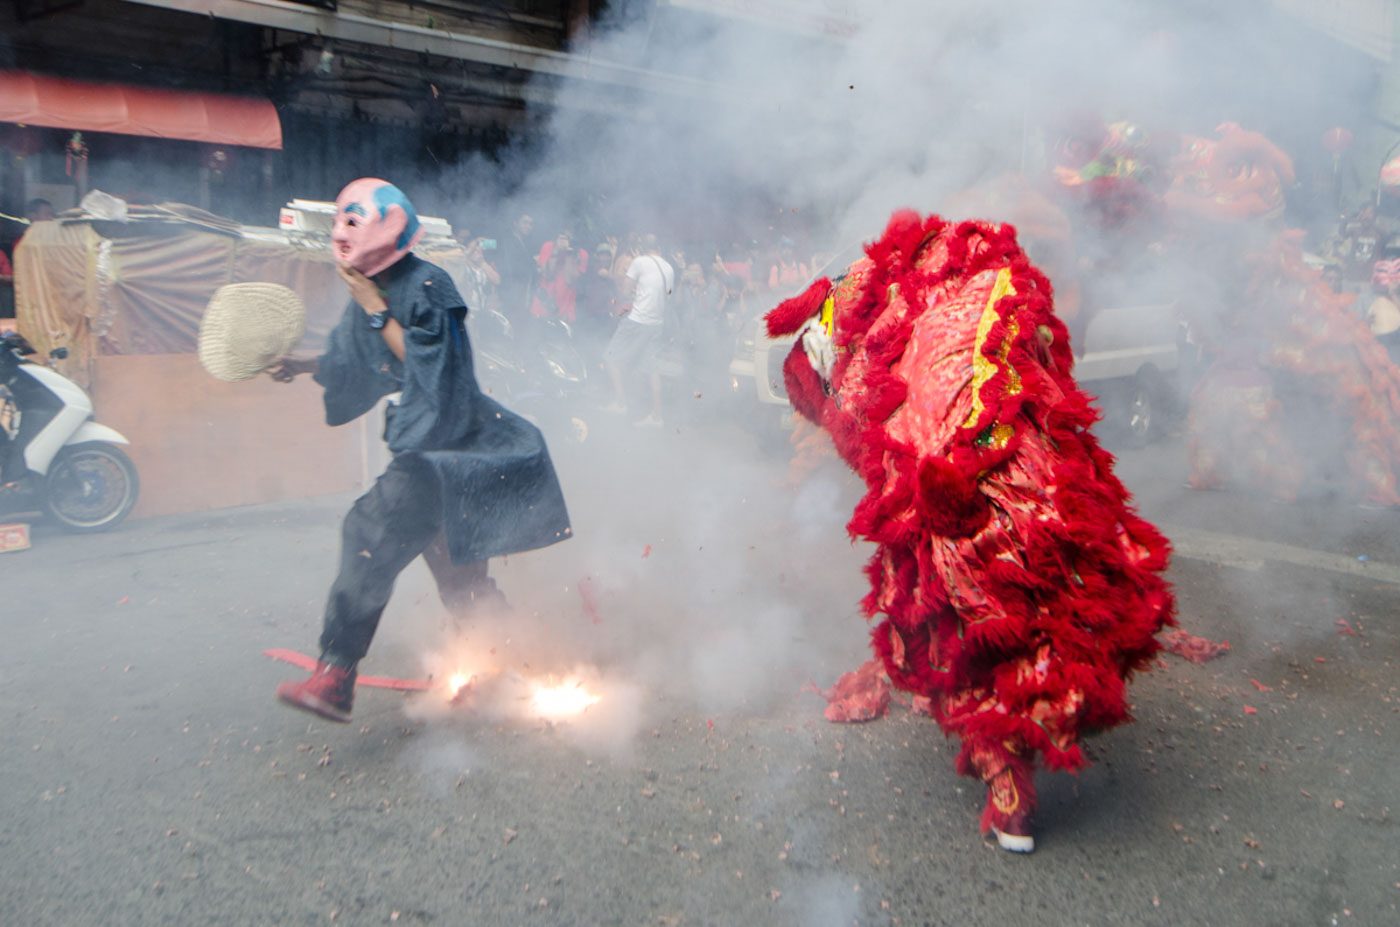 FIRECRACKERS. The festivities won't be complete without firecrackers. File photo by Rob Reyes/Rappler 